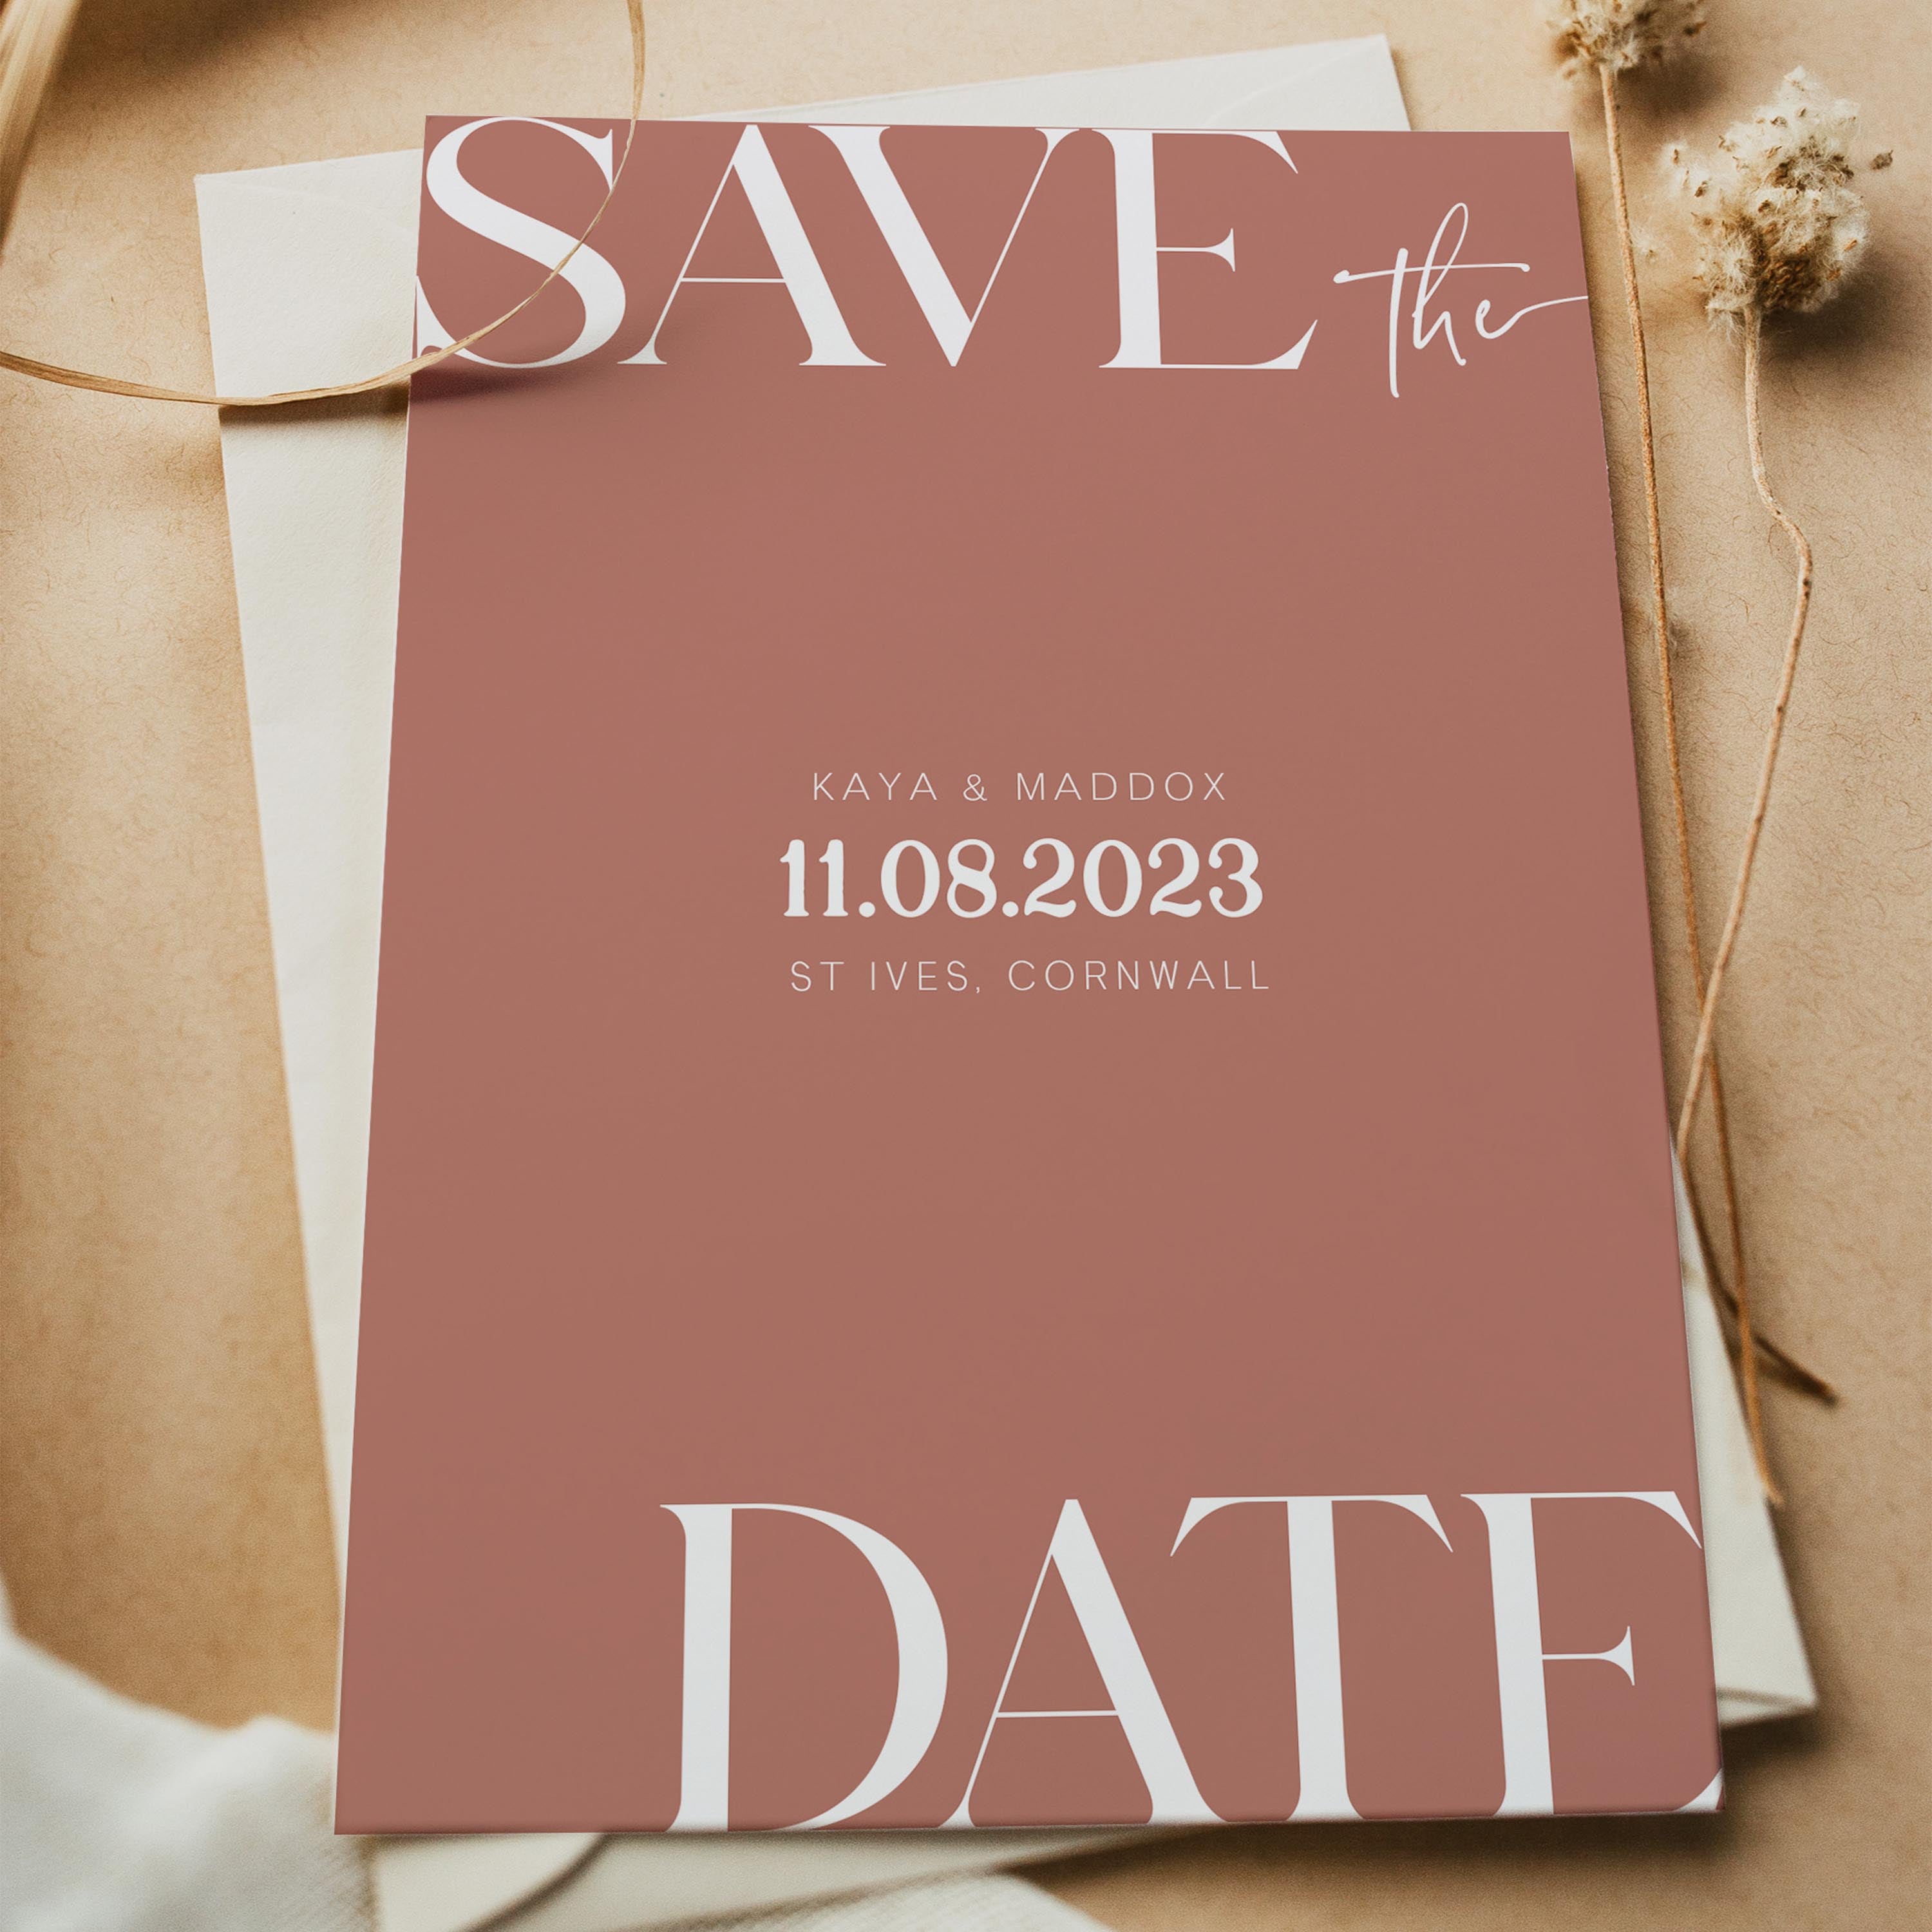 editable dusty rose save the date, printable save the date card, dusty rose wedding invitation suite, editable wedding stationery, printable wedding stationery, modern wedding items, wedding save the dates